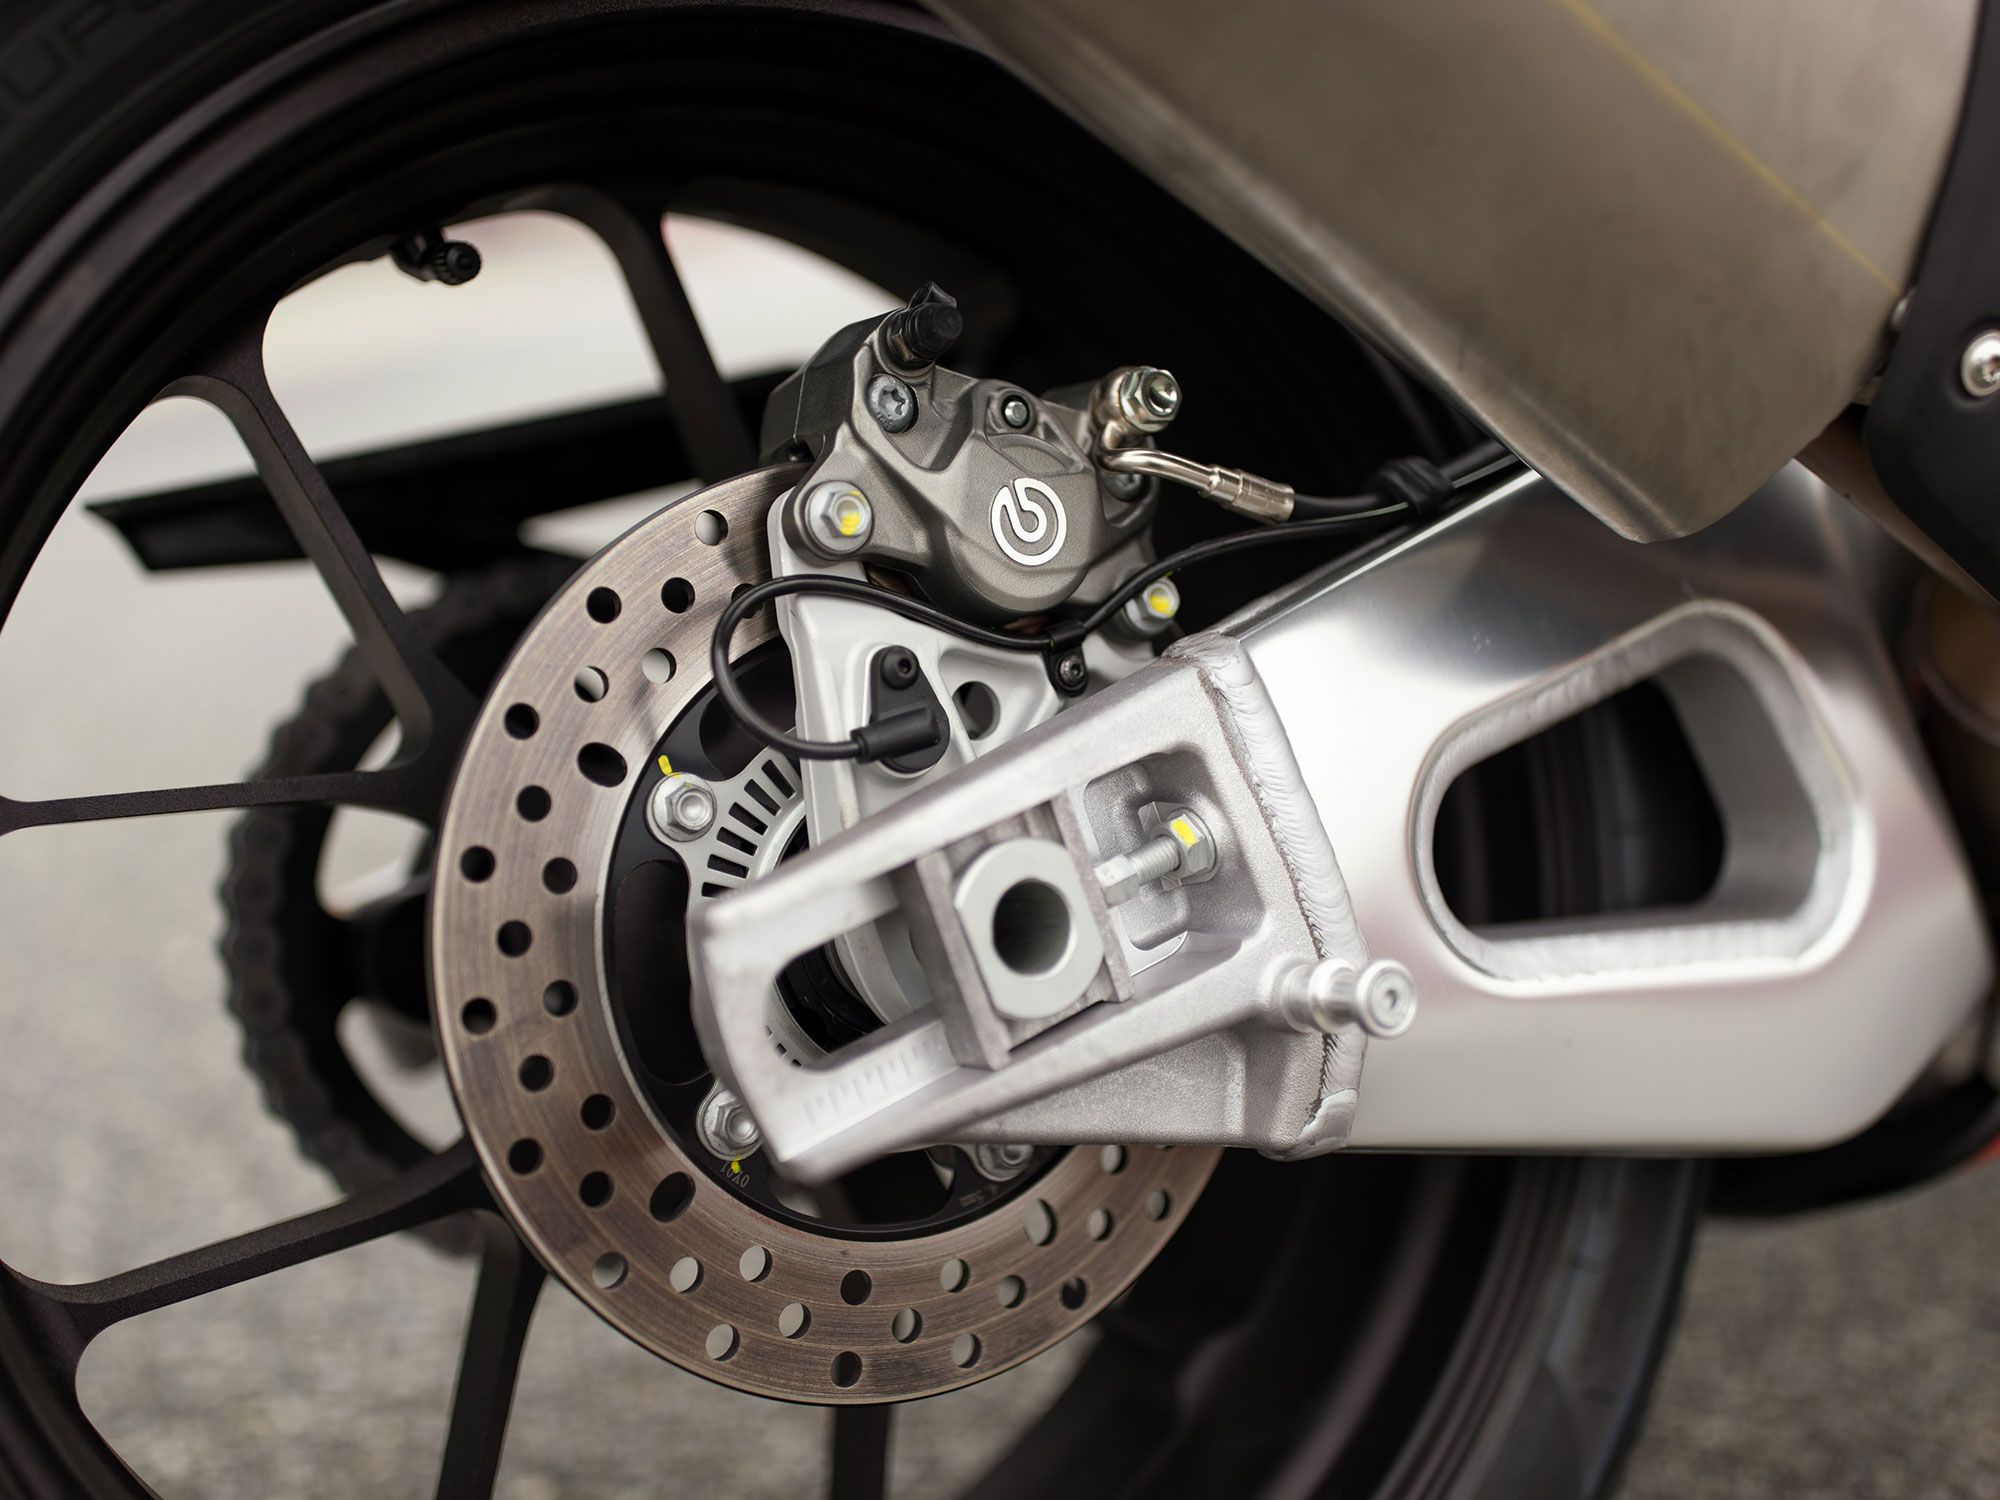 A lighter yet more rigid swingarm offers incredible drive grip off turns—an impressive feat for a motorcycle that delivers 190 hp at the working end of the 200-series Pirelli Diablo Supercorsa SP V3 tire.